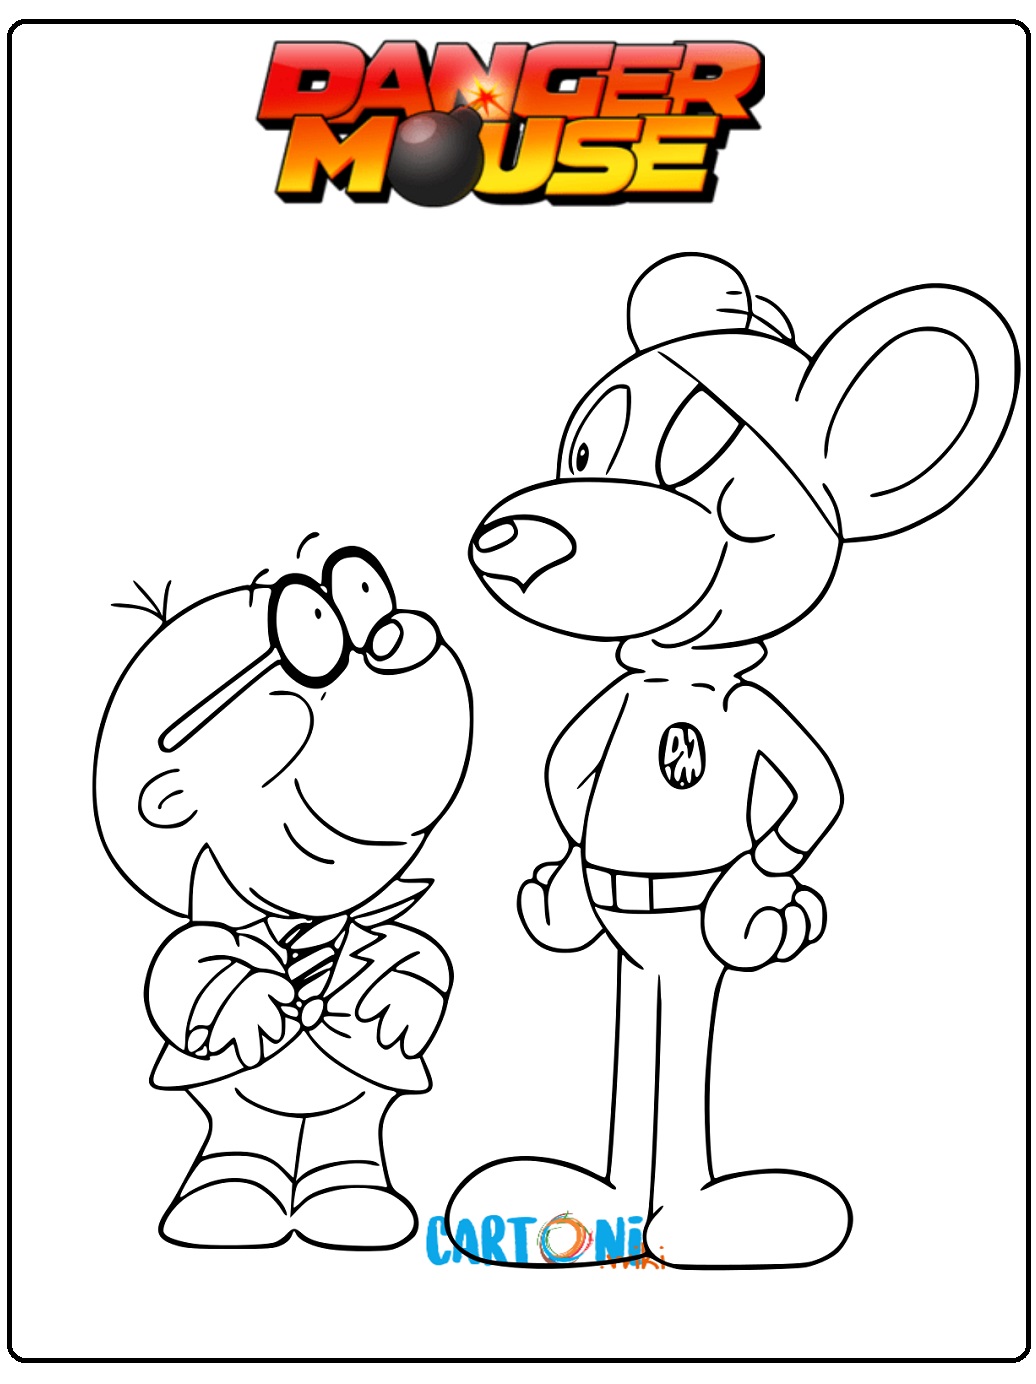 Danger Mouse coloring pages